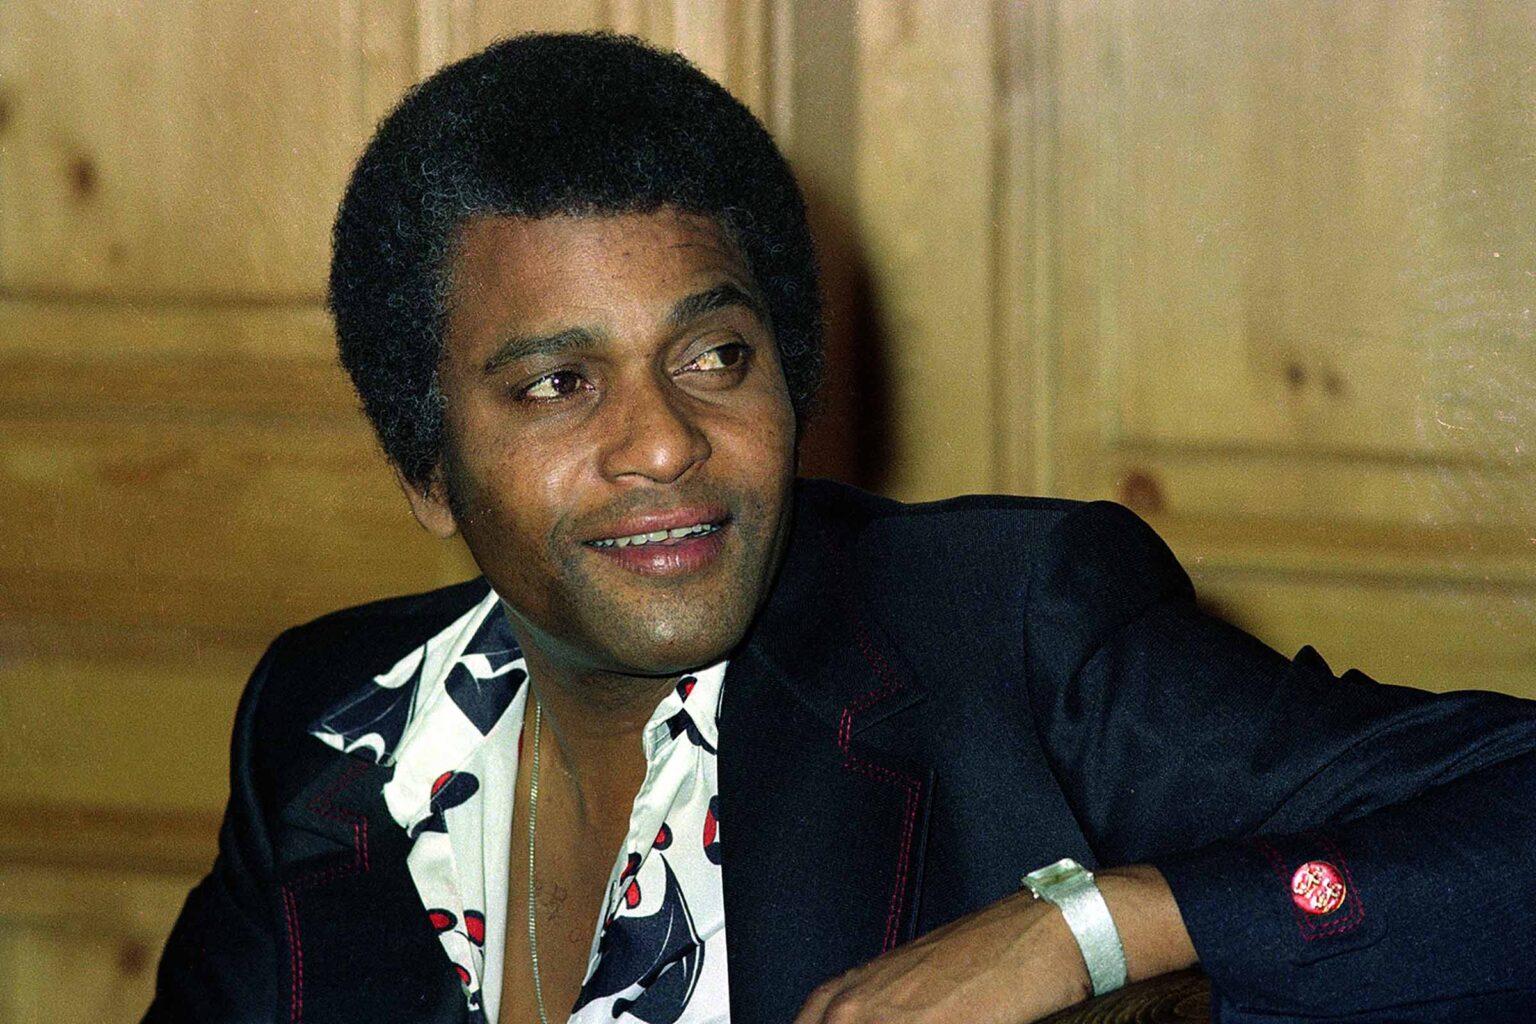 Country music superstar Charley Pride has died at age 86 from COVID-19. Why was the country crooner such a trailblazing legend throughout his career?